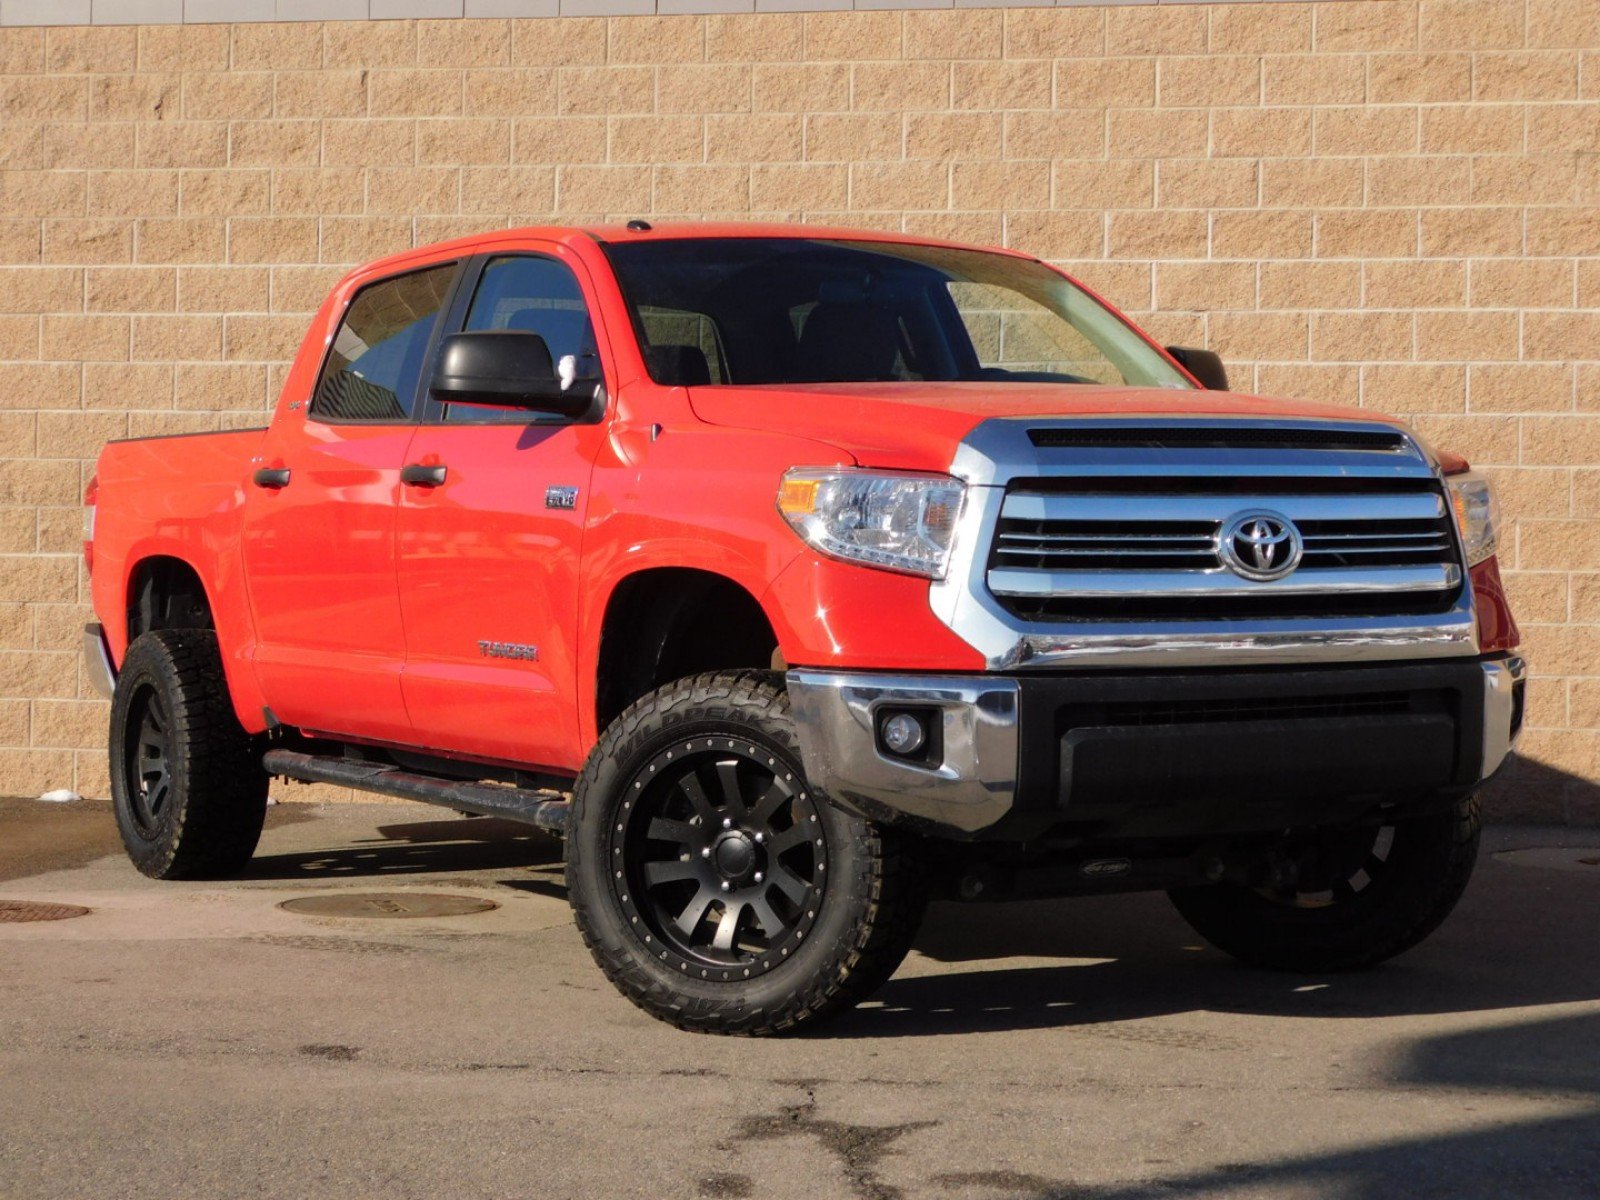 Pre-Owned 2016 Toyota Tundra 4WD Truck SR5 Crew Cab Pickup #2R8262A